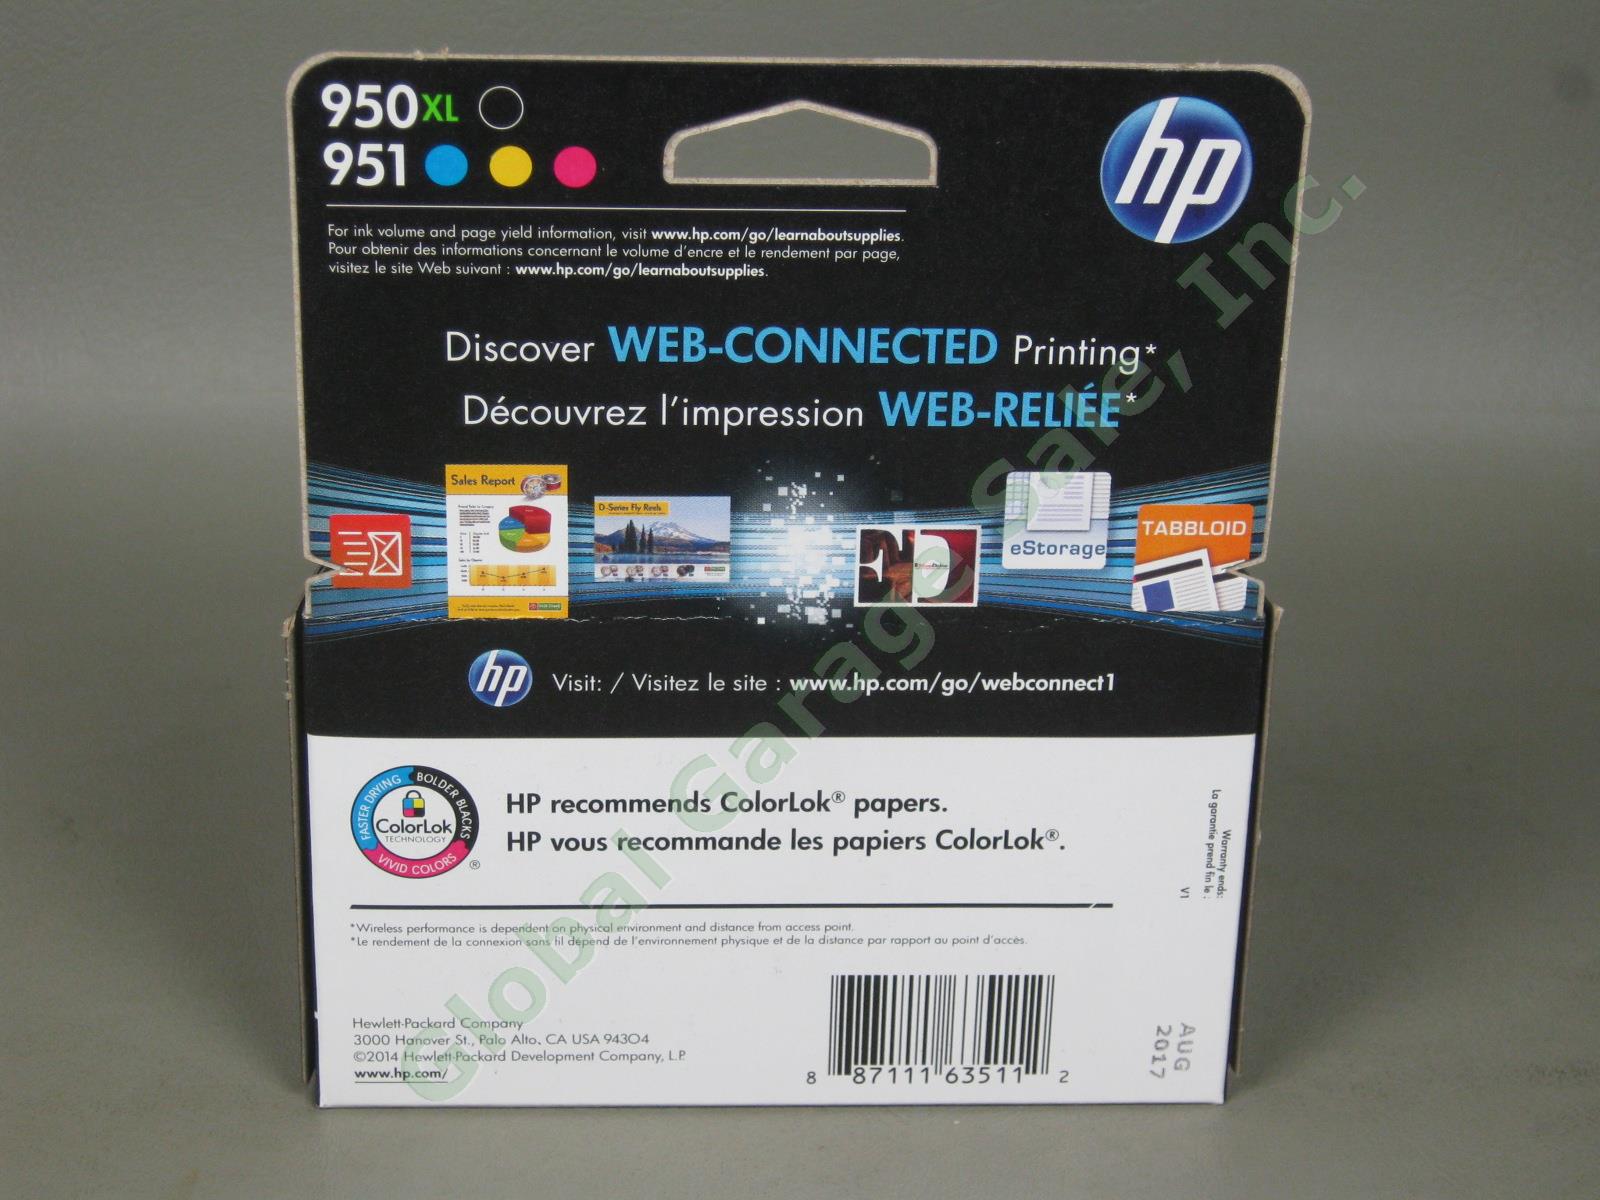 NEW Sealed Genuine HP Officejet 4 Ink Cartridge Combo Pack 950XL Black 951 Color 2